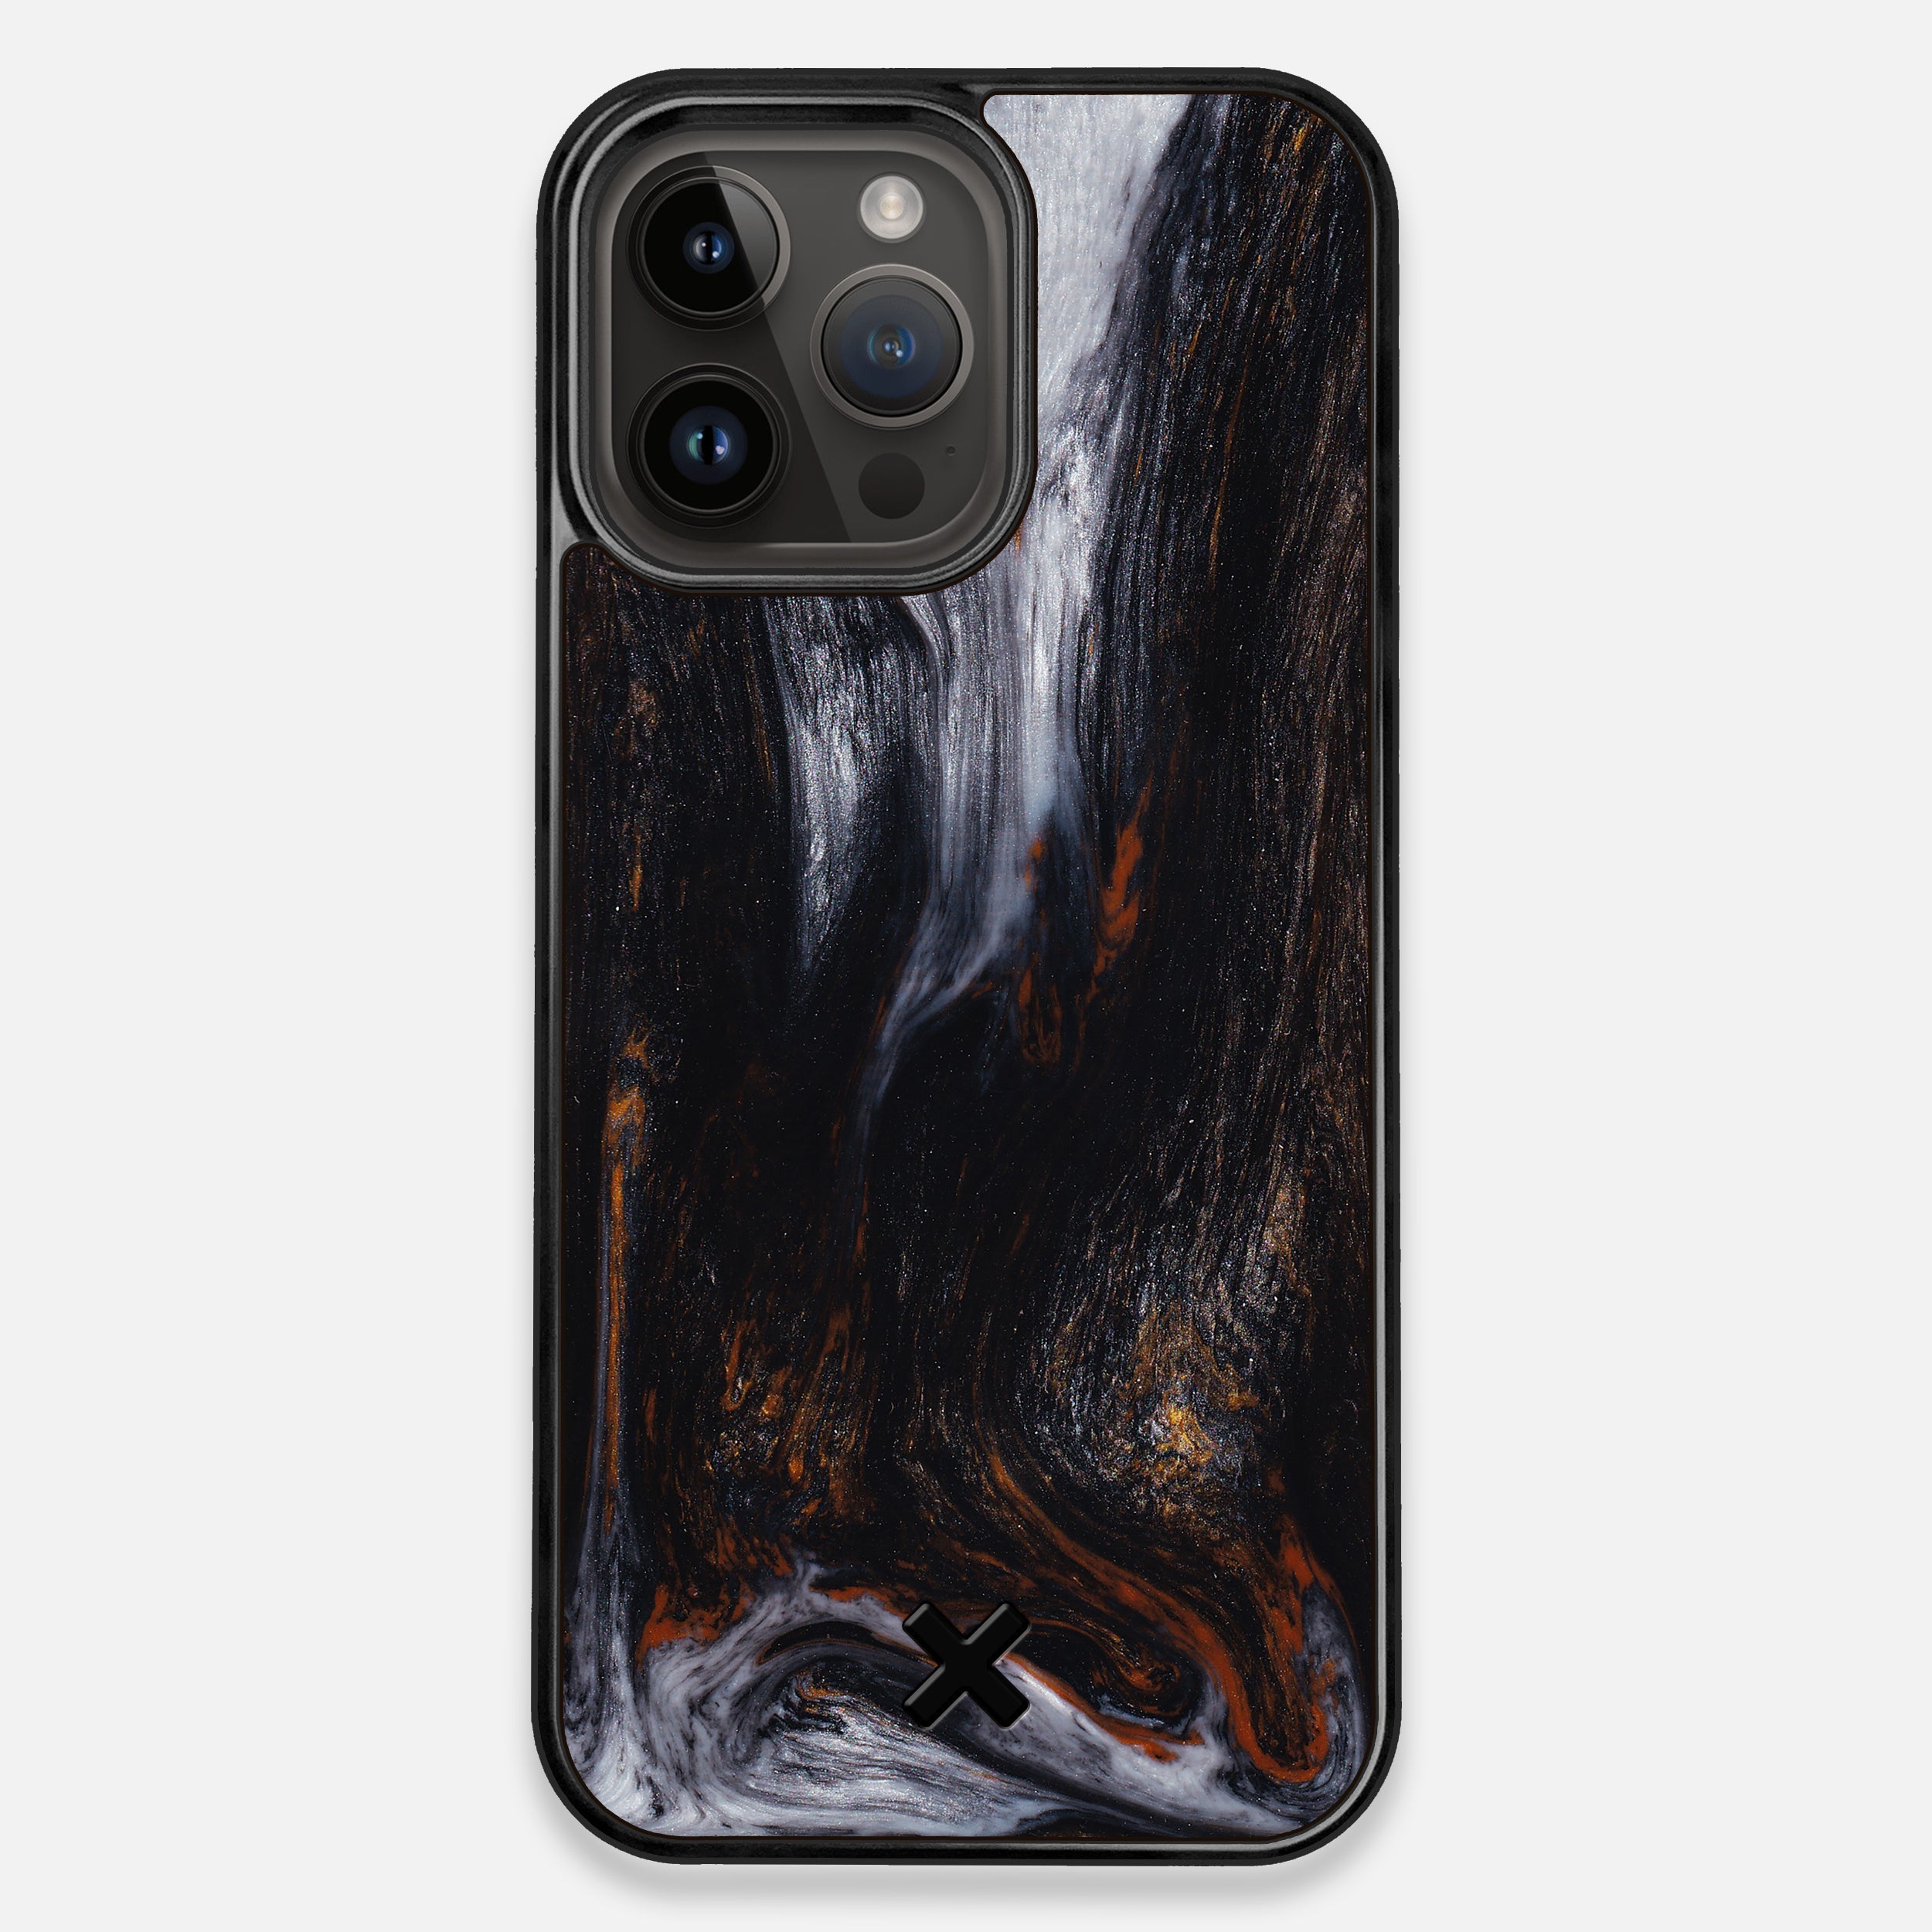 One & Only - Wood and Resin Case - #01569